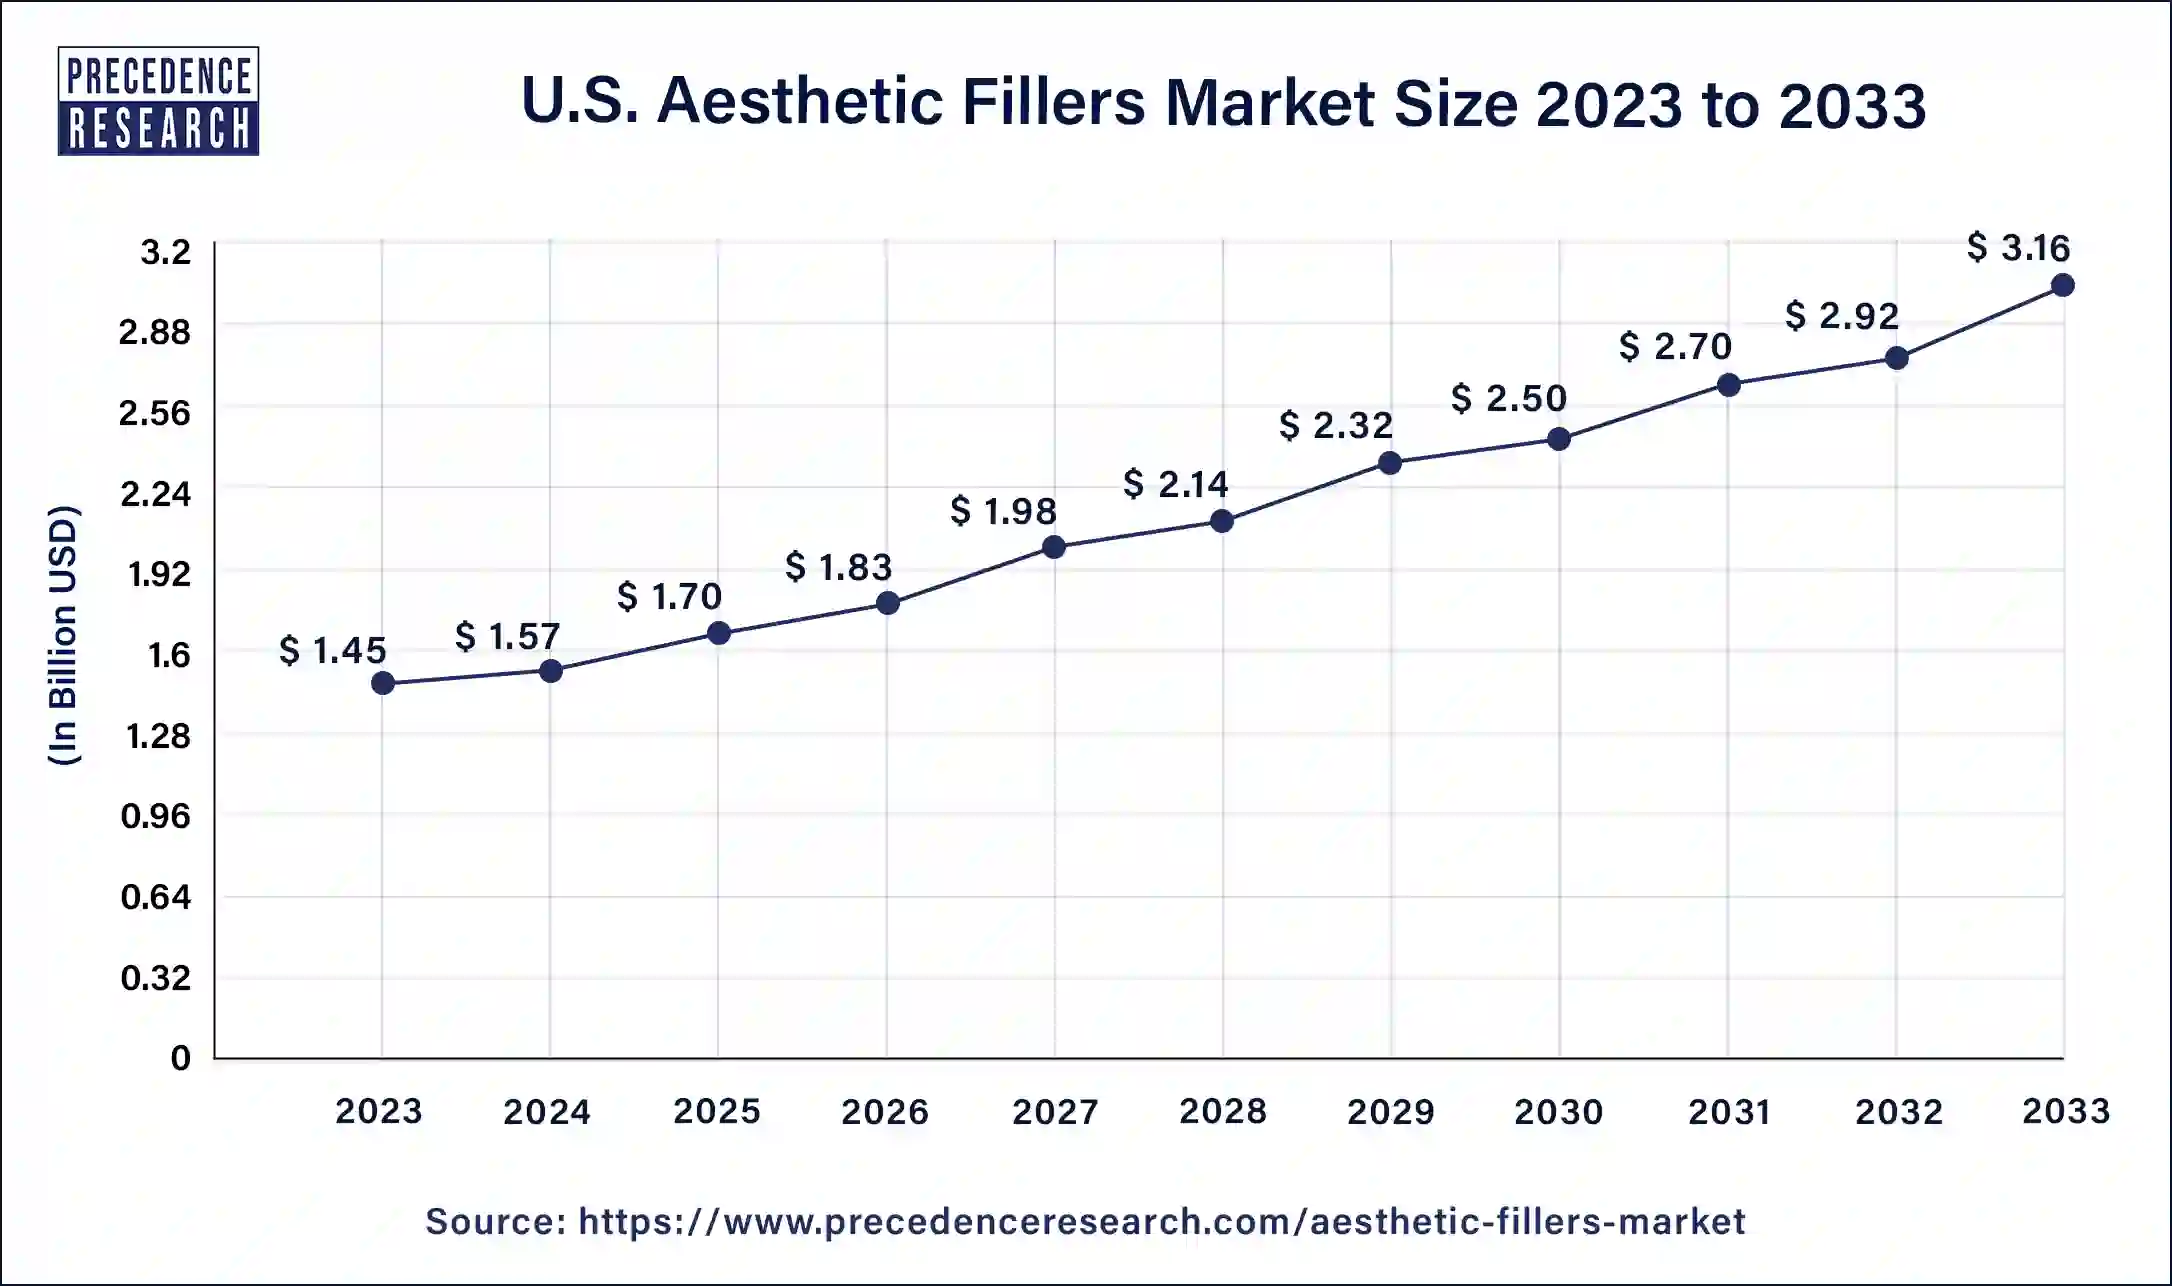 U.S. Aesthetic Fillers Market Size 2024 to 2033